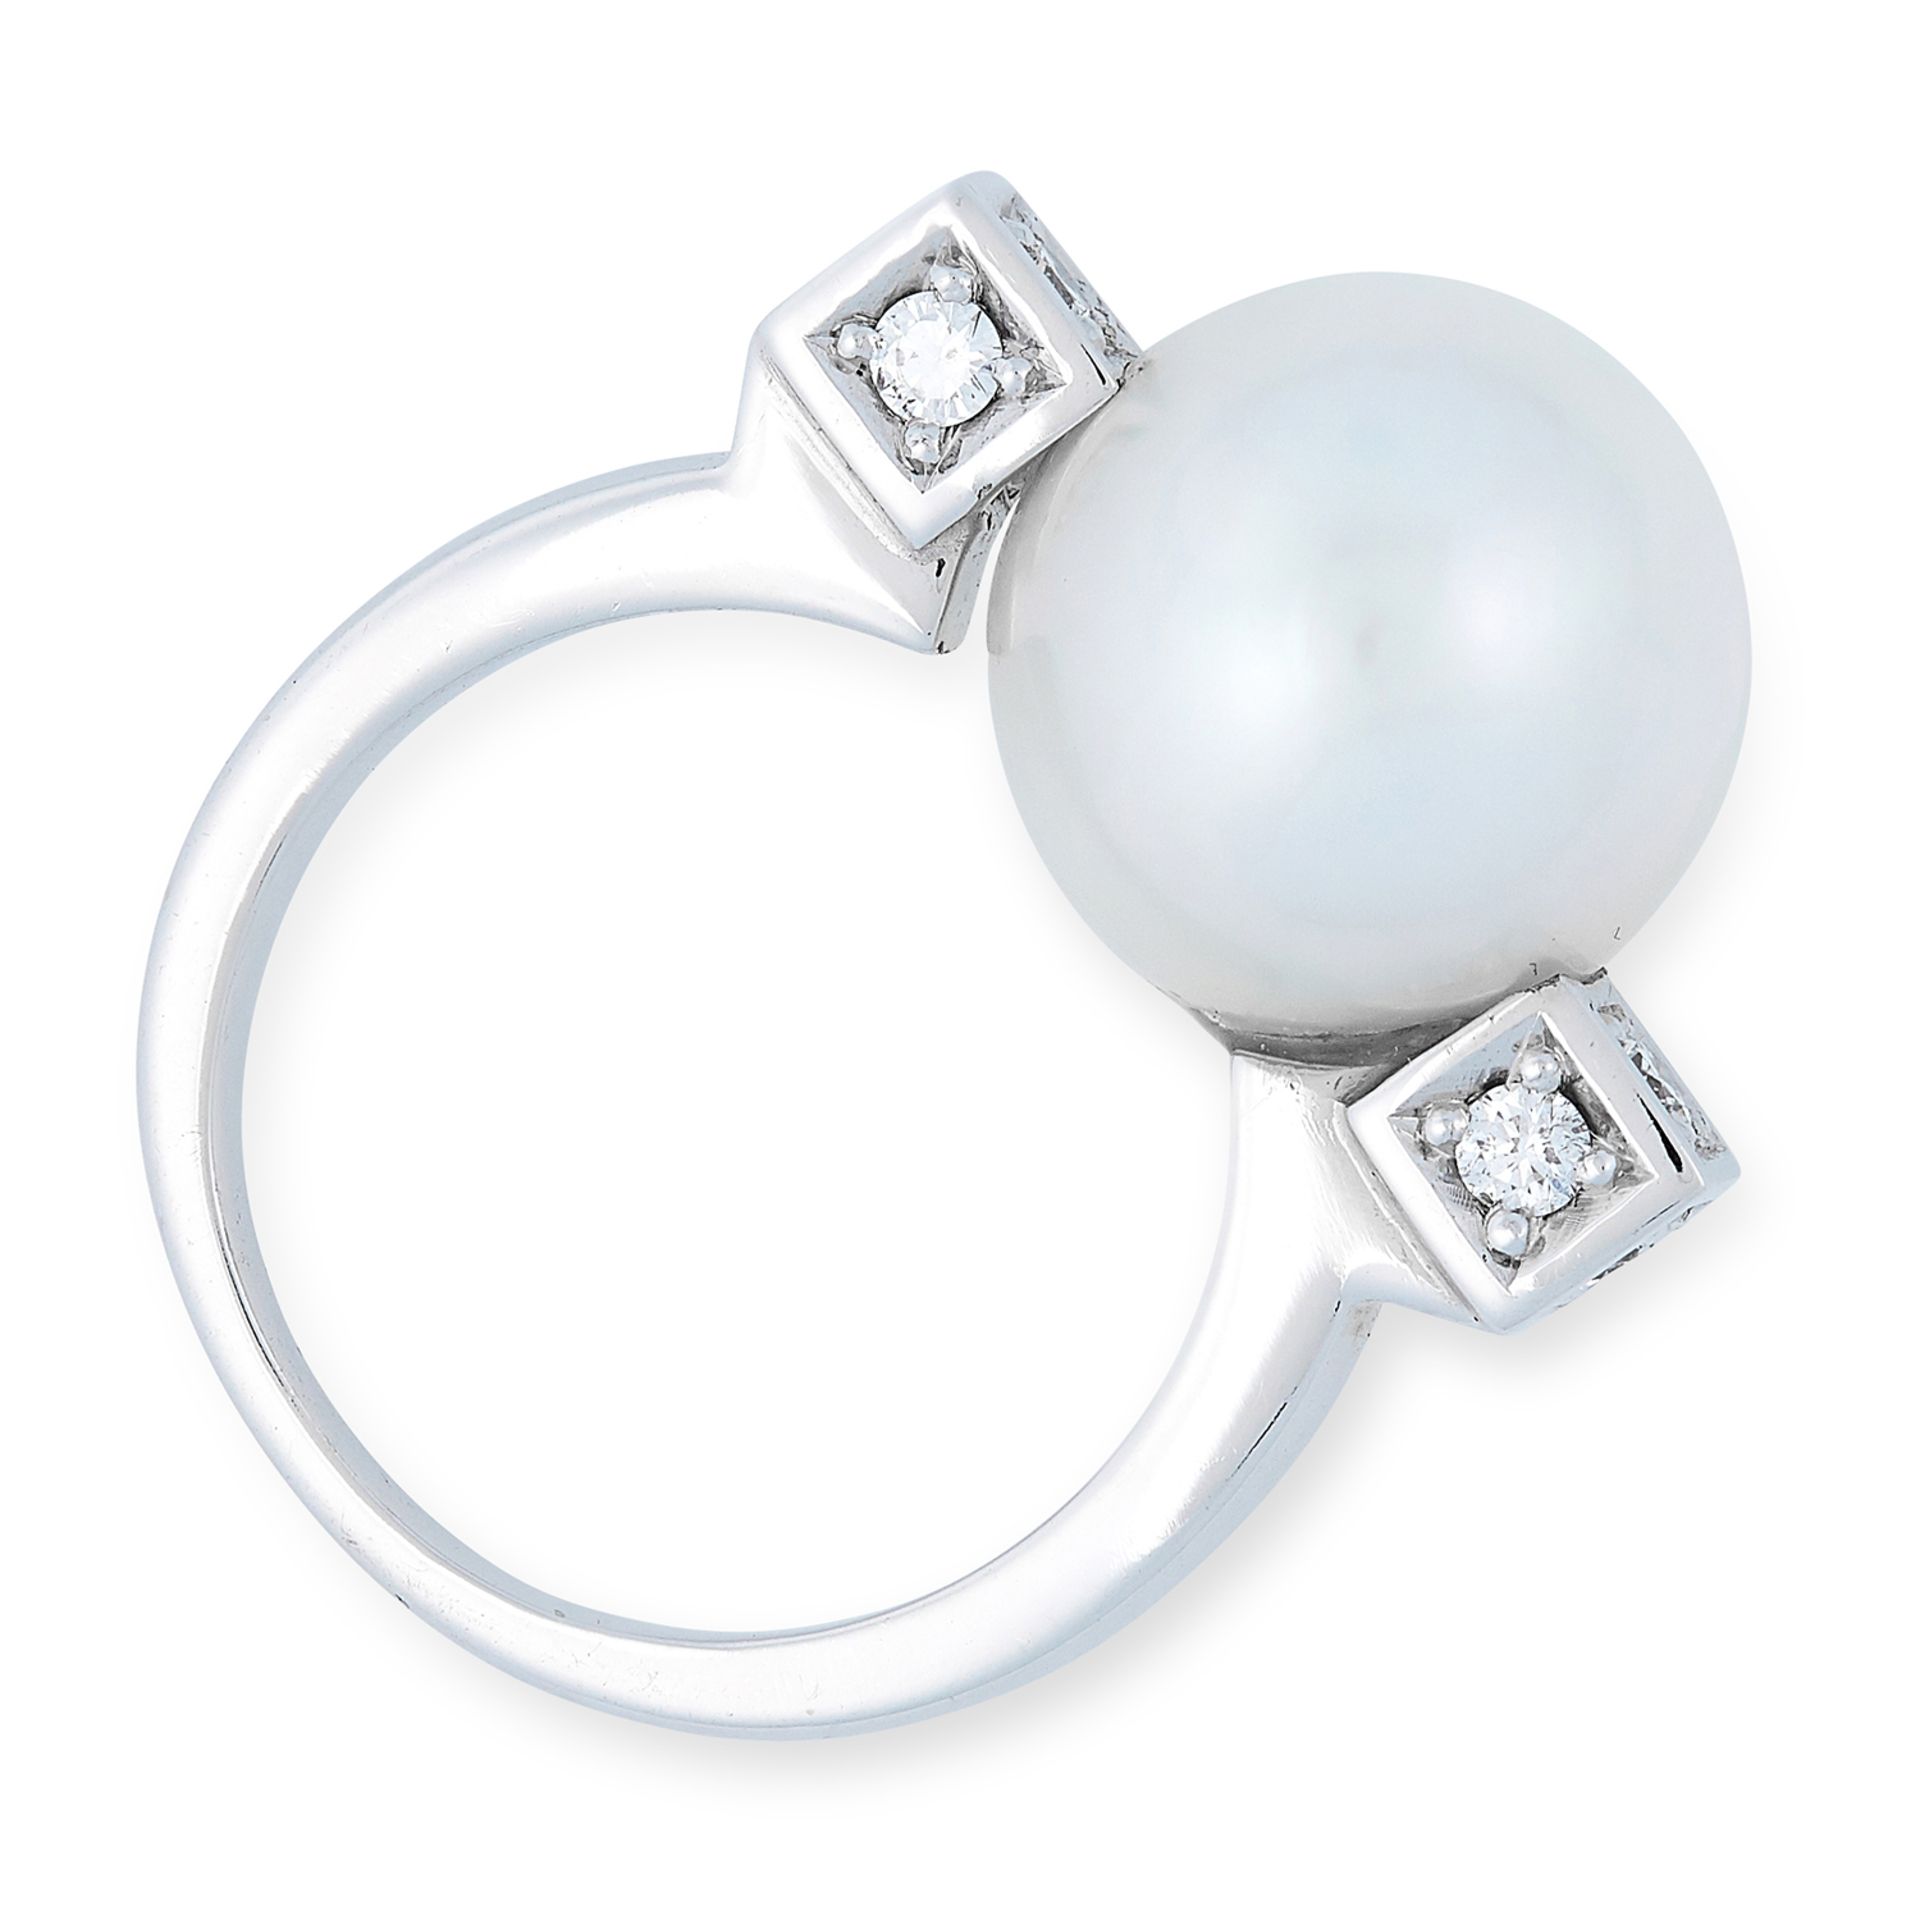 A PEARL AND DIAMOND RING set with a large pearl between round cut diamonds, size J / 5, 9.5g.